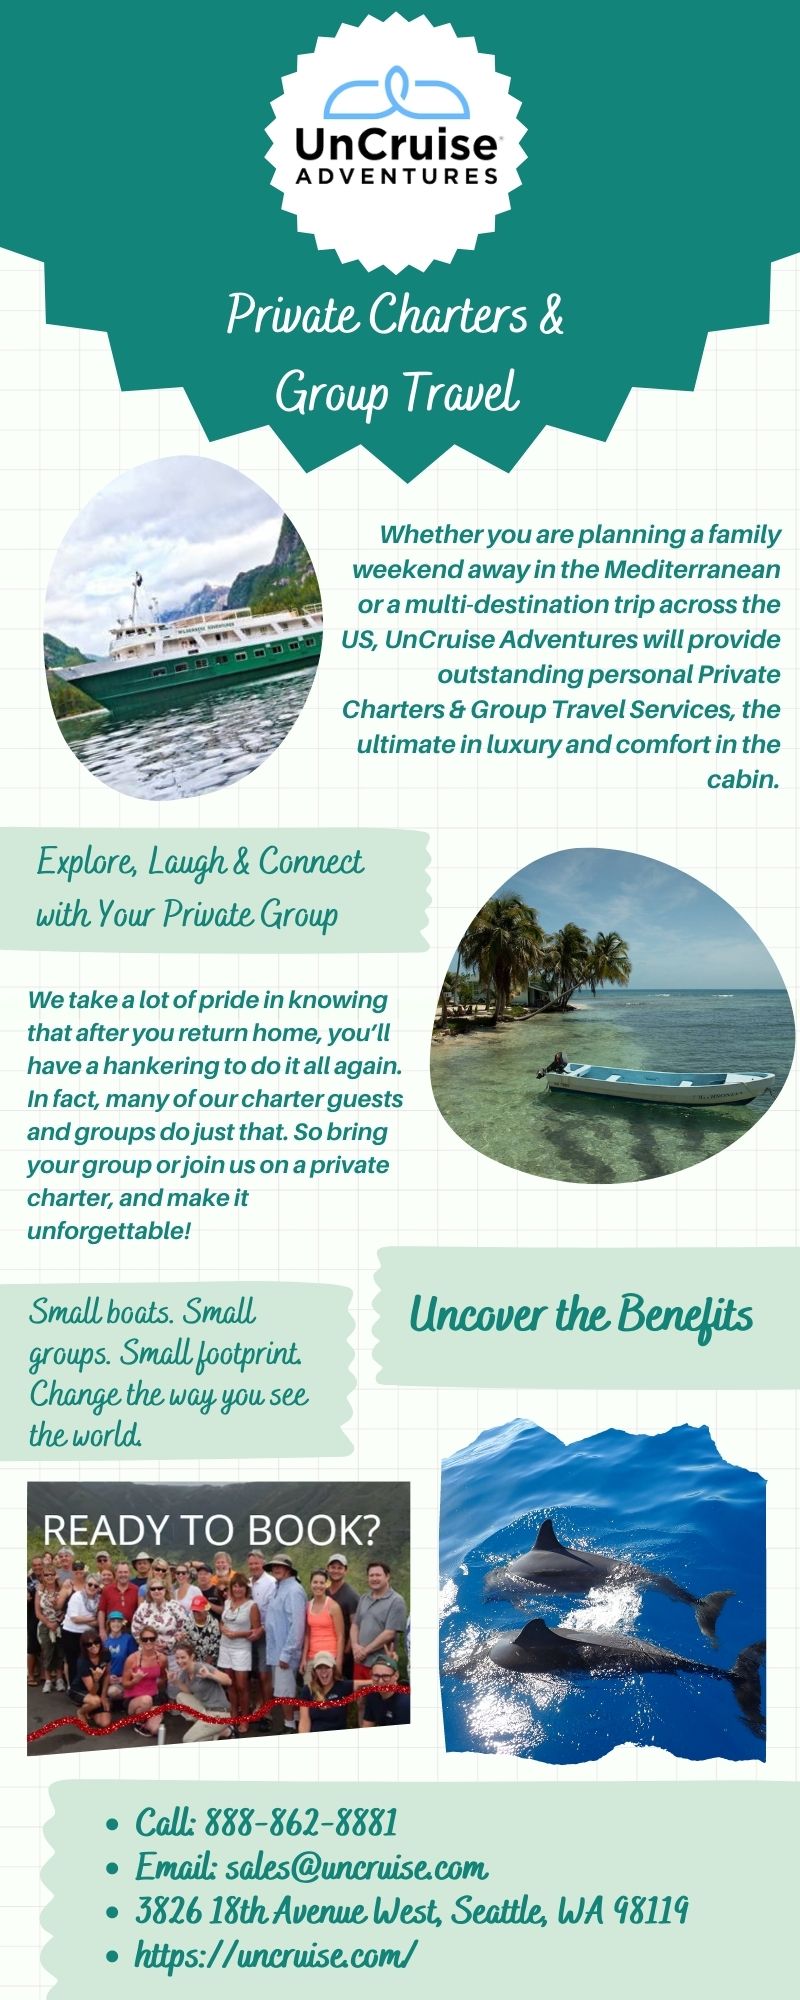 Book Private Charters & Group Travel Trip with UnCruise Adventures